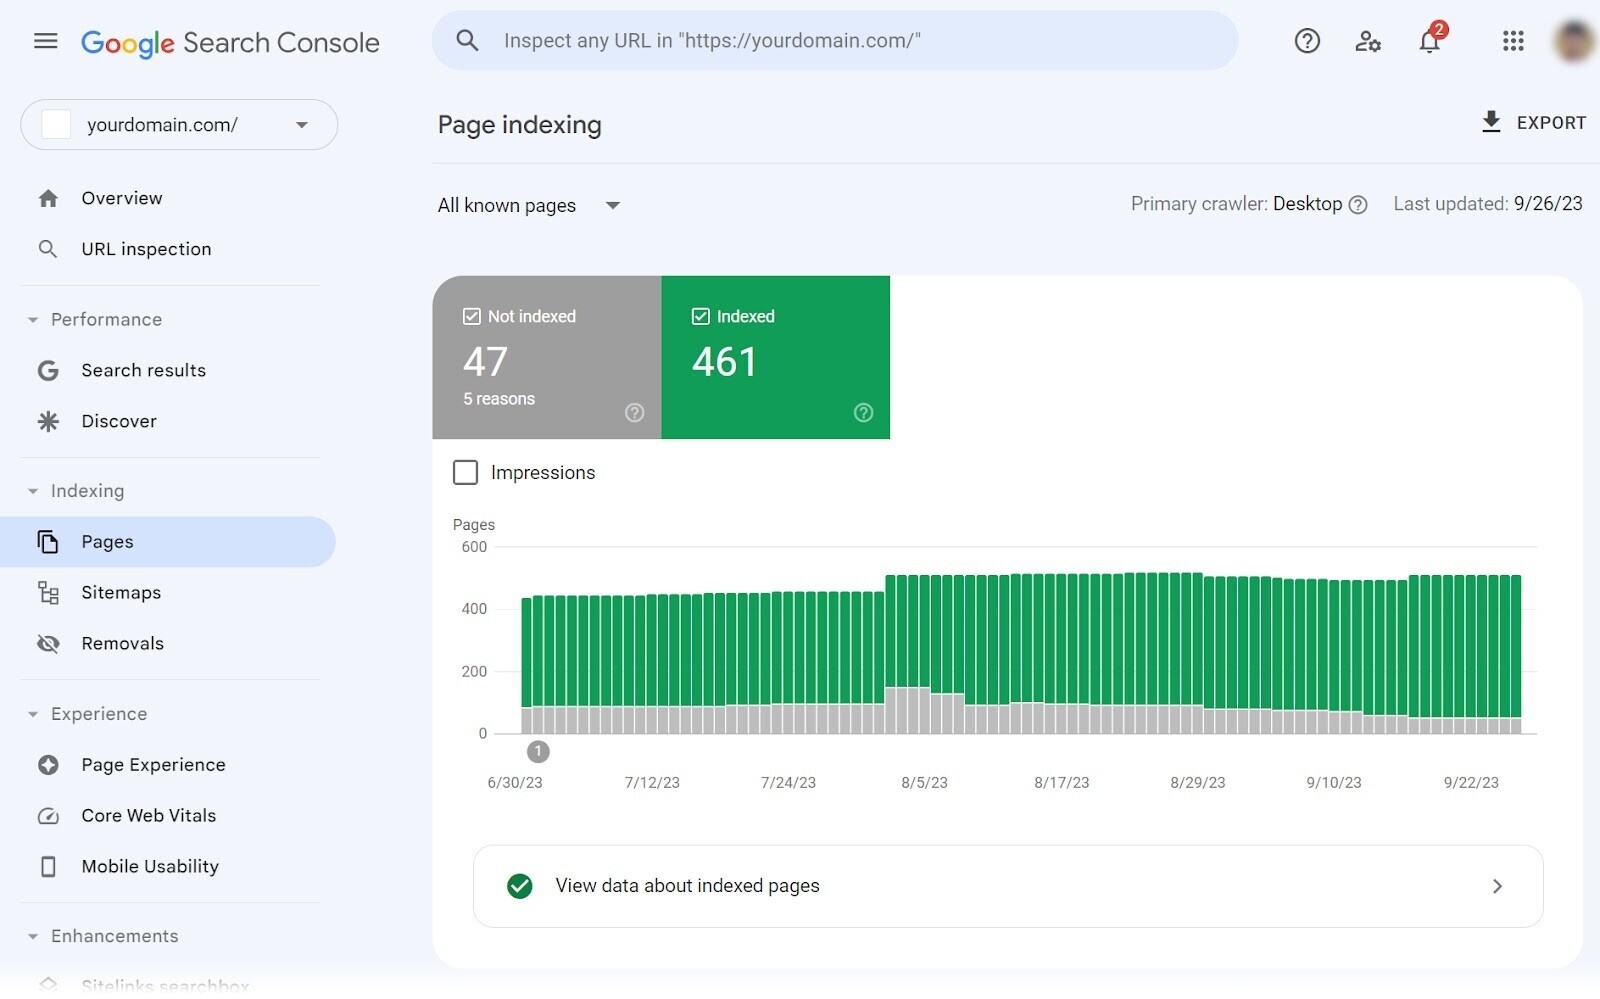 Google Search Console "Page indexing" report